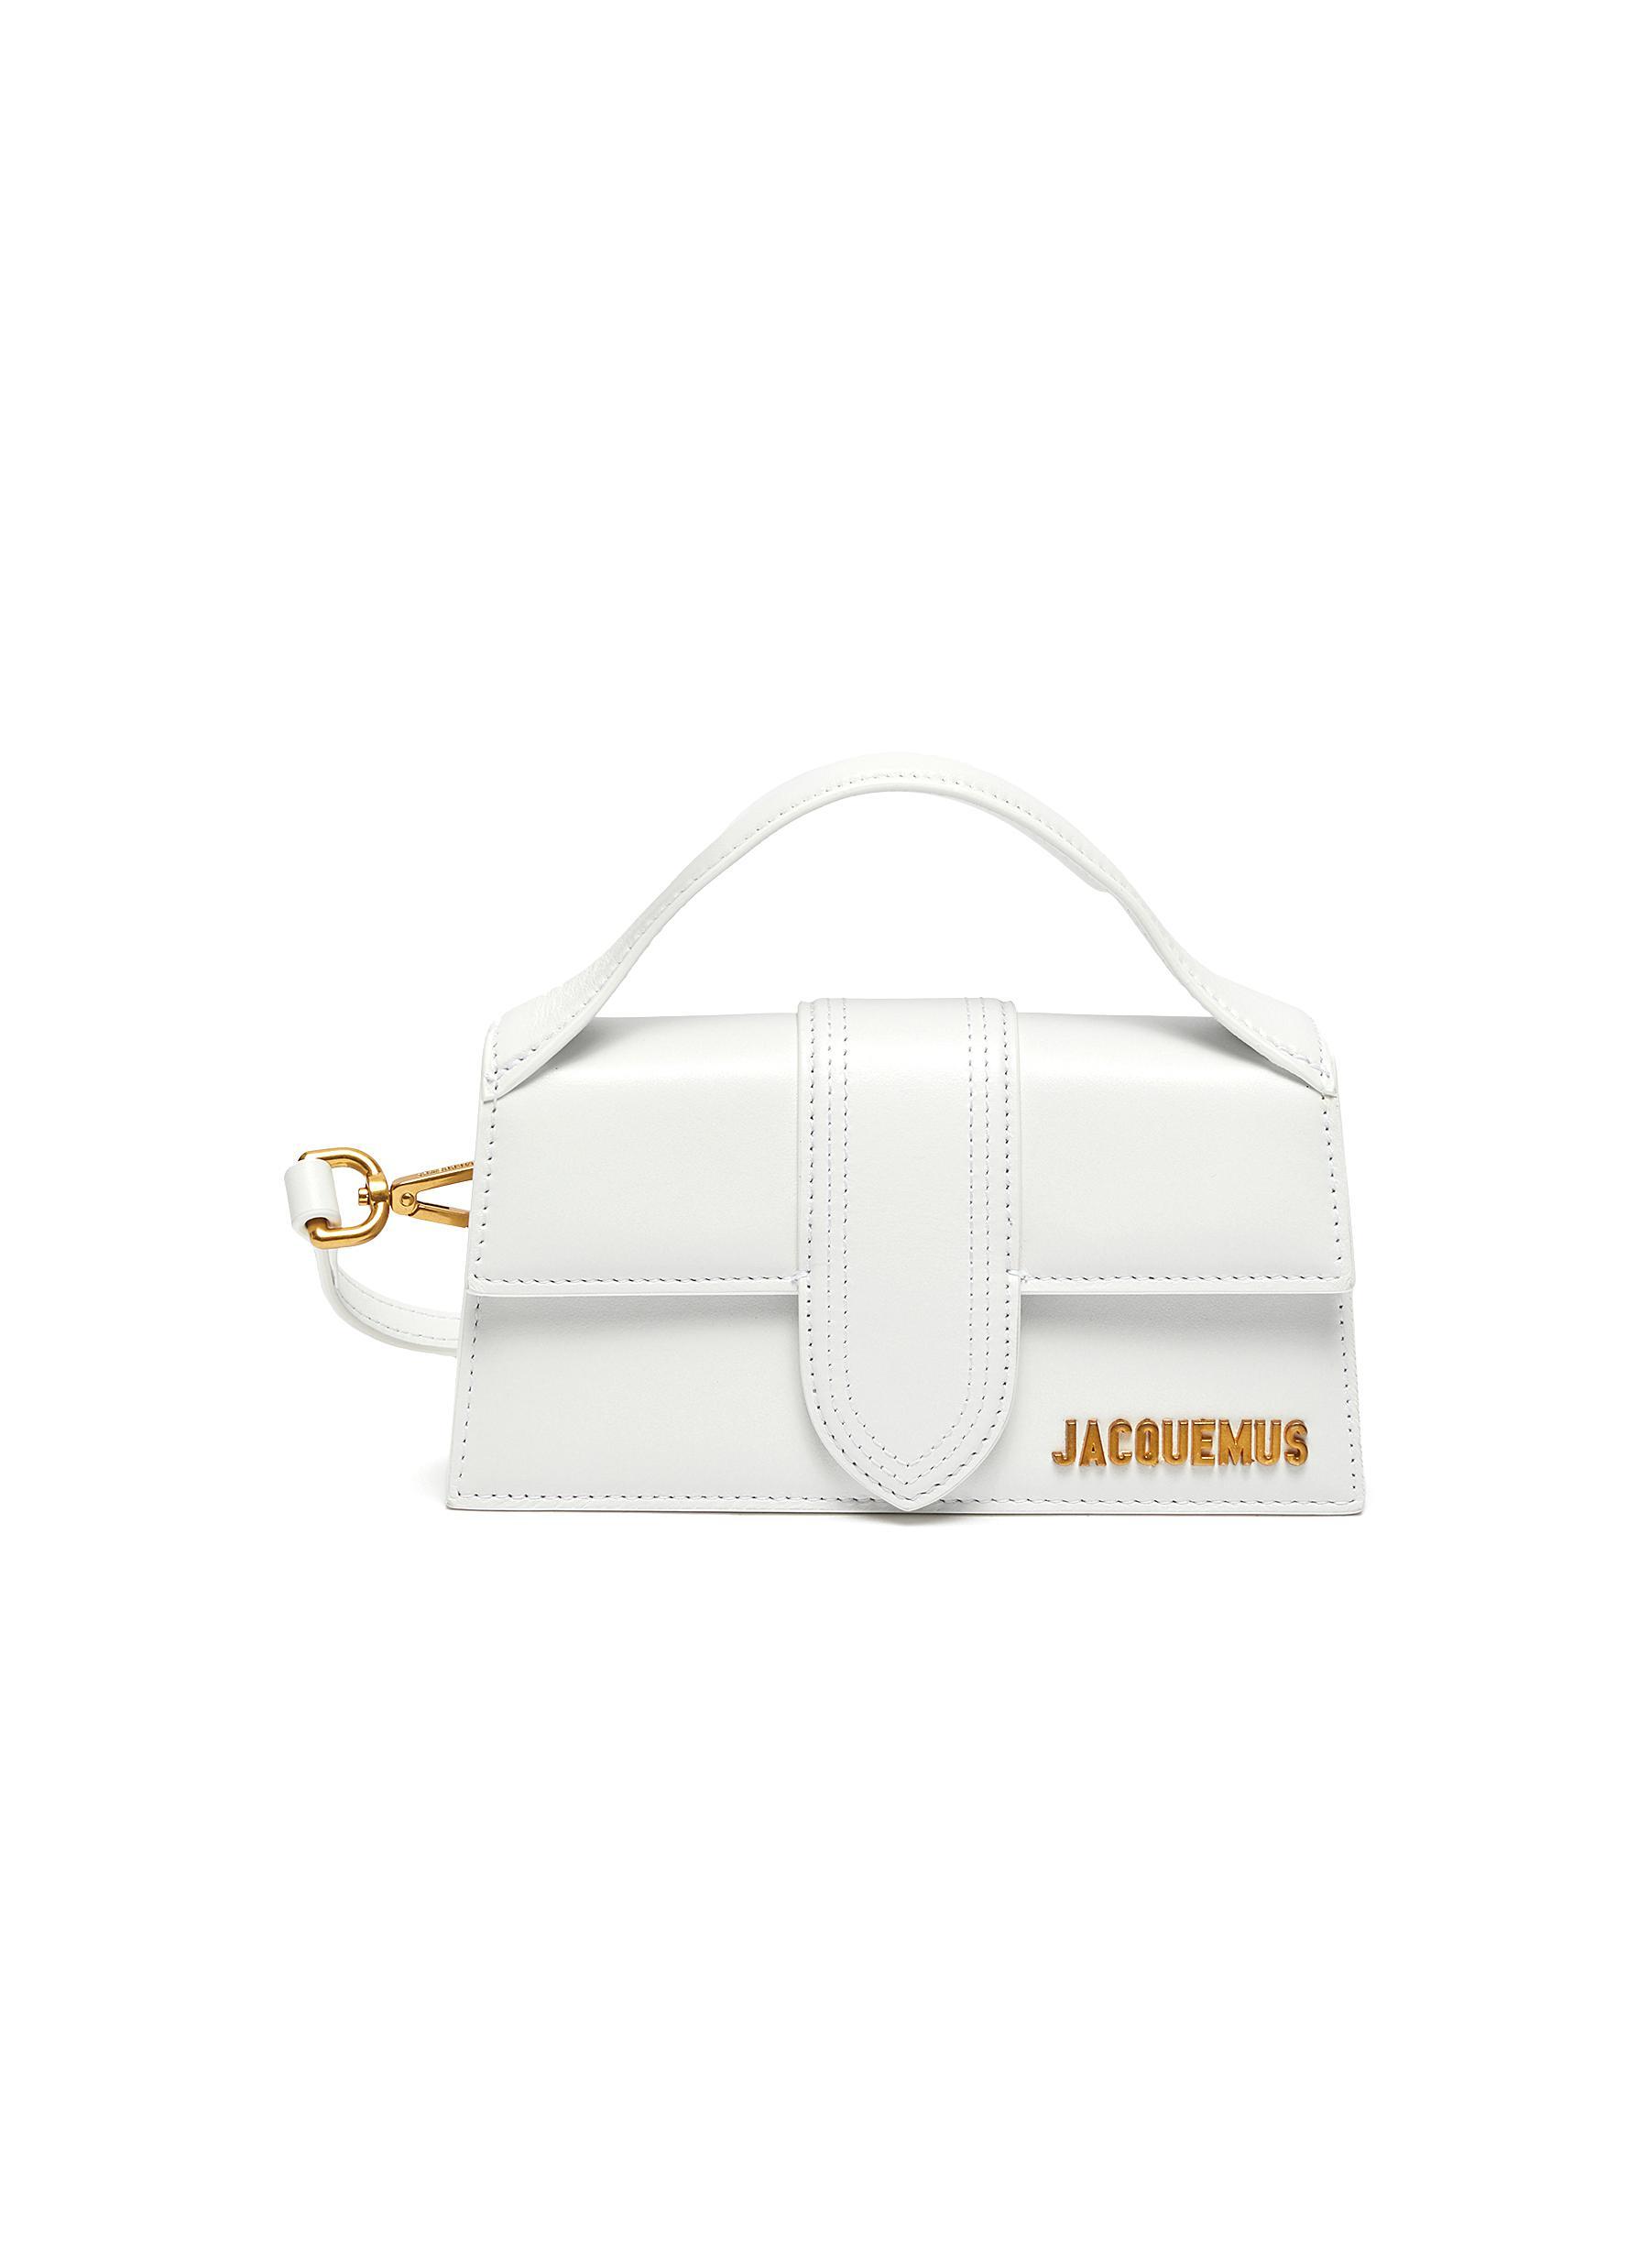 Jacquemus Le Bambino Leather Top Handle Bag in White | Lyst